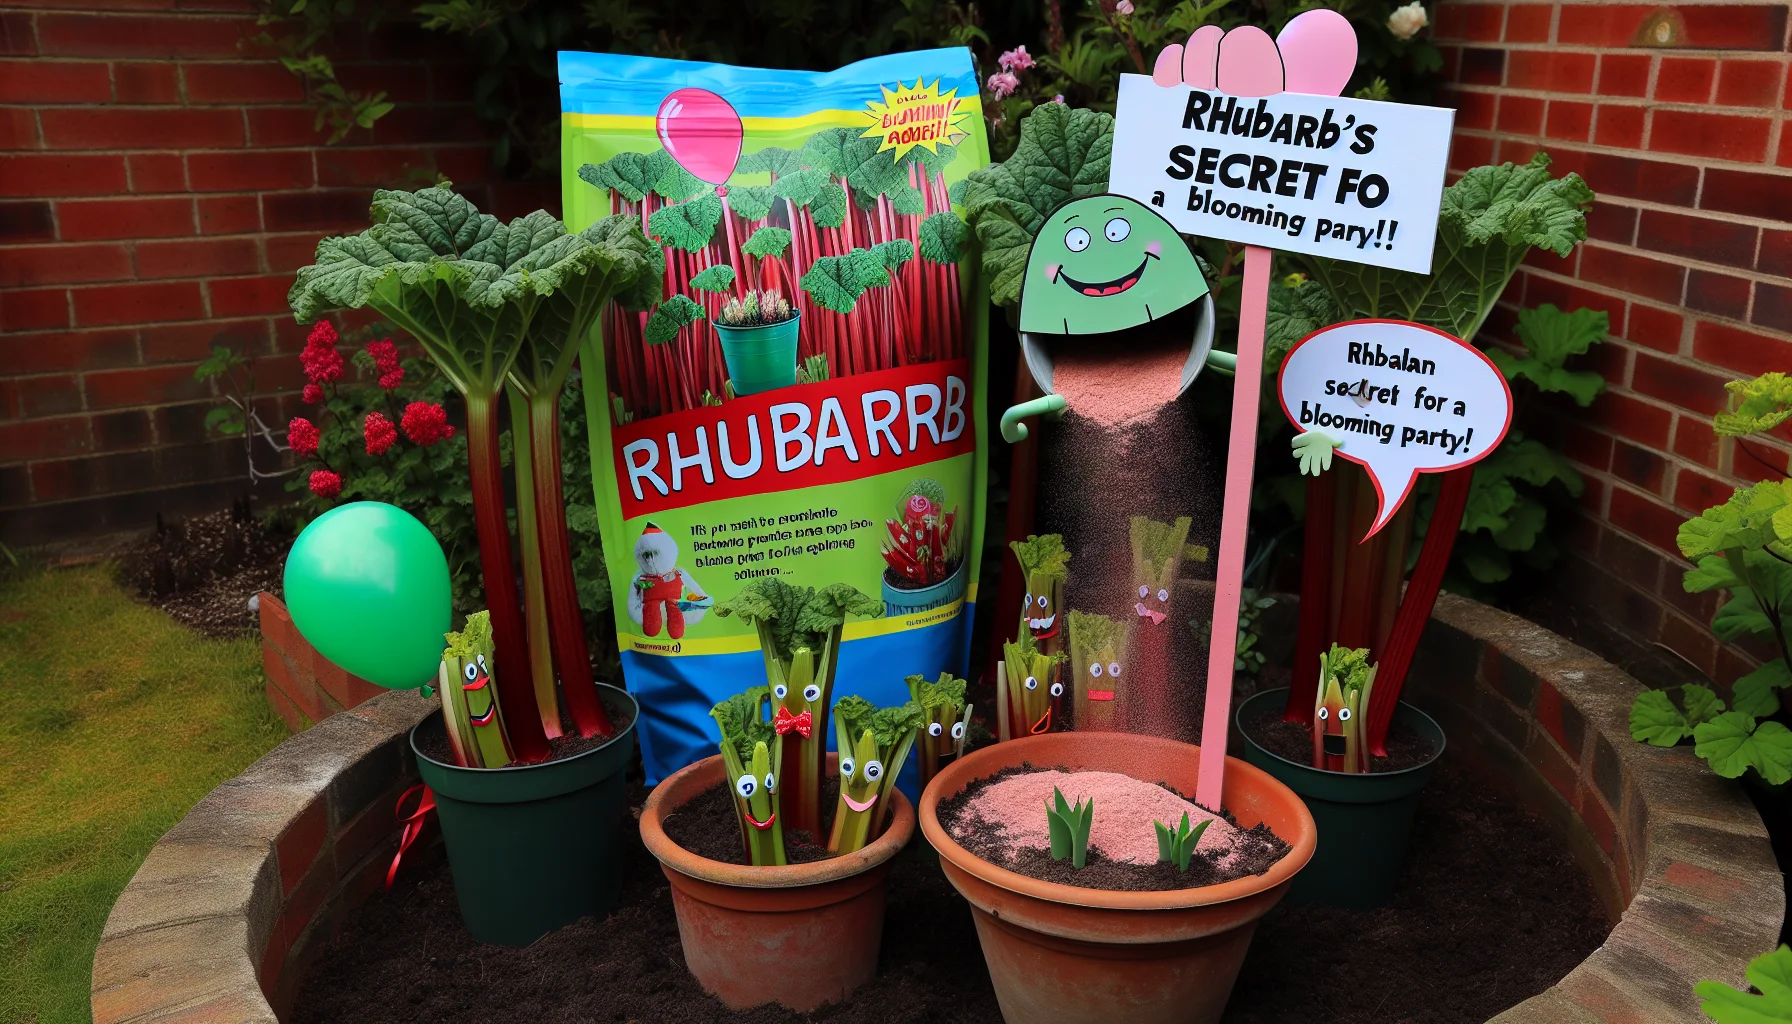 Imagine a humorous scene in a home garden. A bunch of rhubarb plants seem to be having a party, with little cartoon faces, party hats, and balloons. Near them, a bag of rhubarb fertilizer is displayed, looking like a much-adored celebrity. The bag is decorated with bright colors and a charismatic mascot, which is laughing and sprinkling fertilizer like it's stardust, making the plants even happier. A sign next to the bag reads 'Rhubarb's Secret for a Blooming Party!' This unique scenario showcases the fun and joy of gardening as an activity.